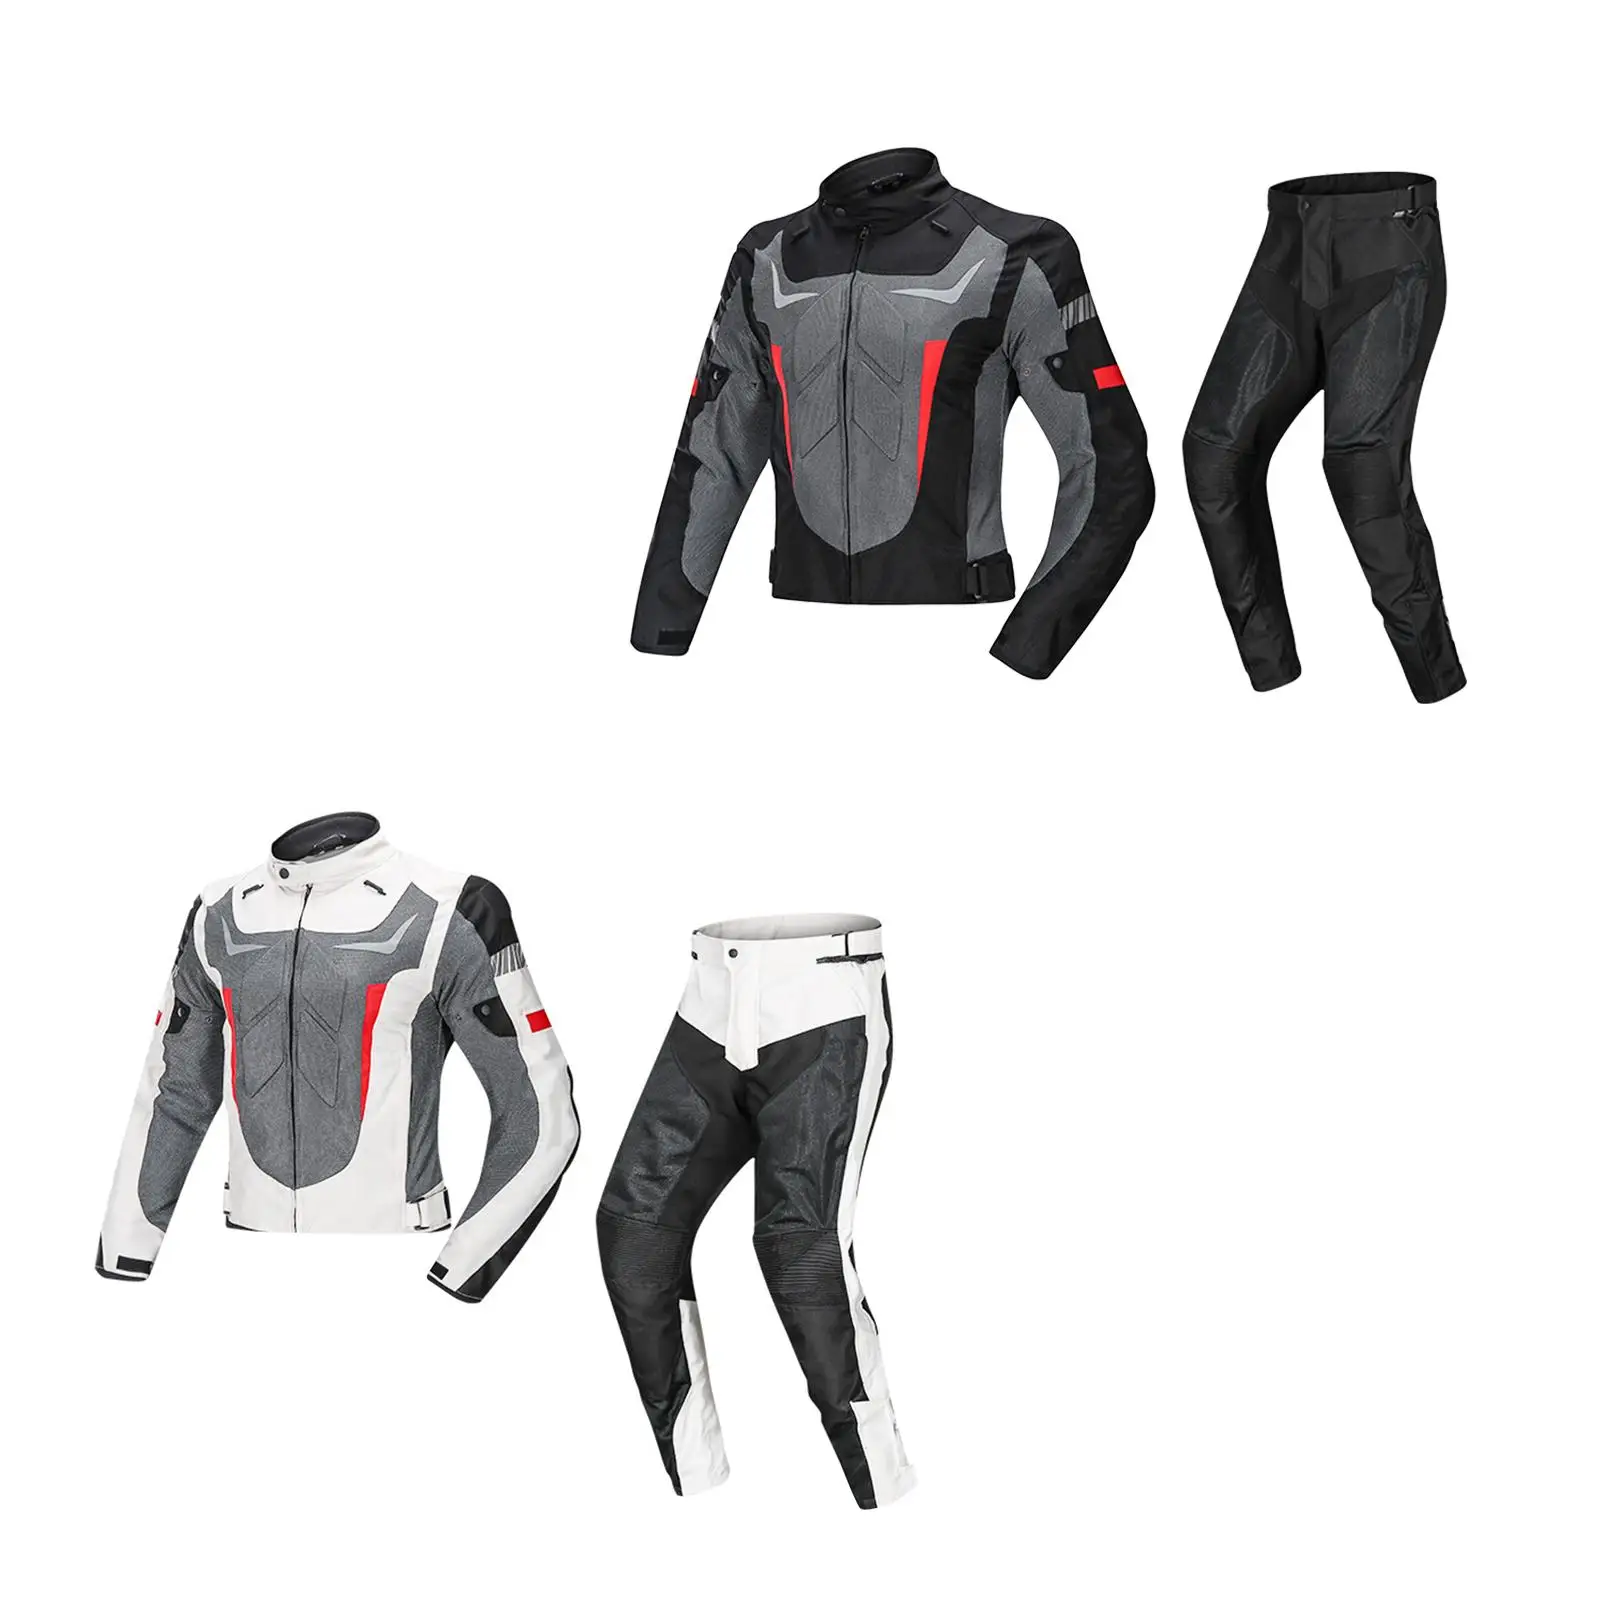 Riding Jacket Windproof Durable Motorcycle Jacket Wearable Riding Protection